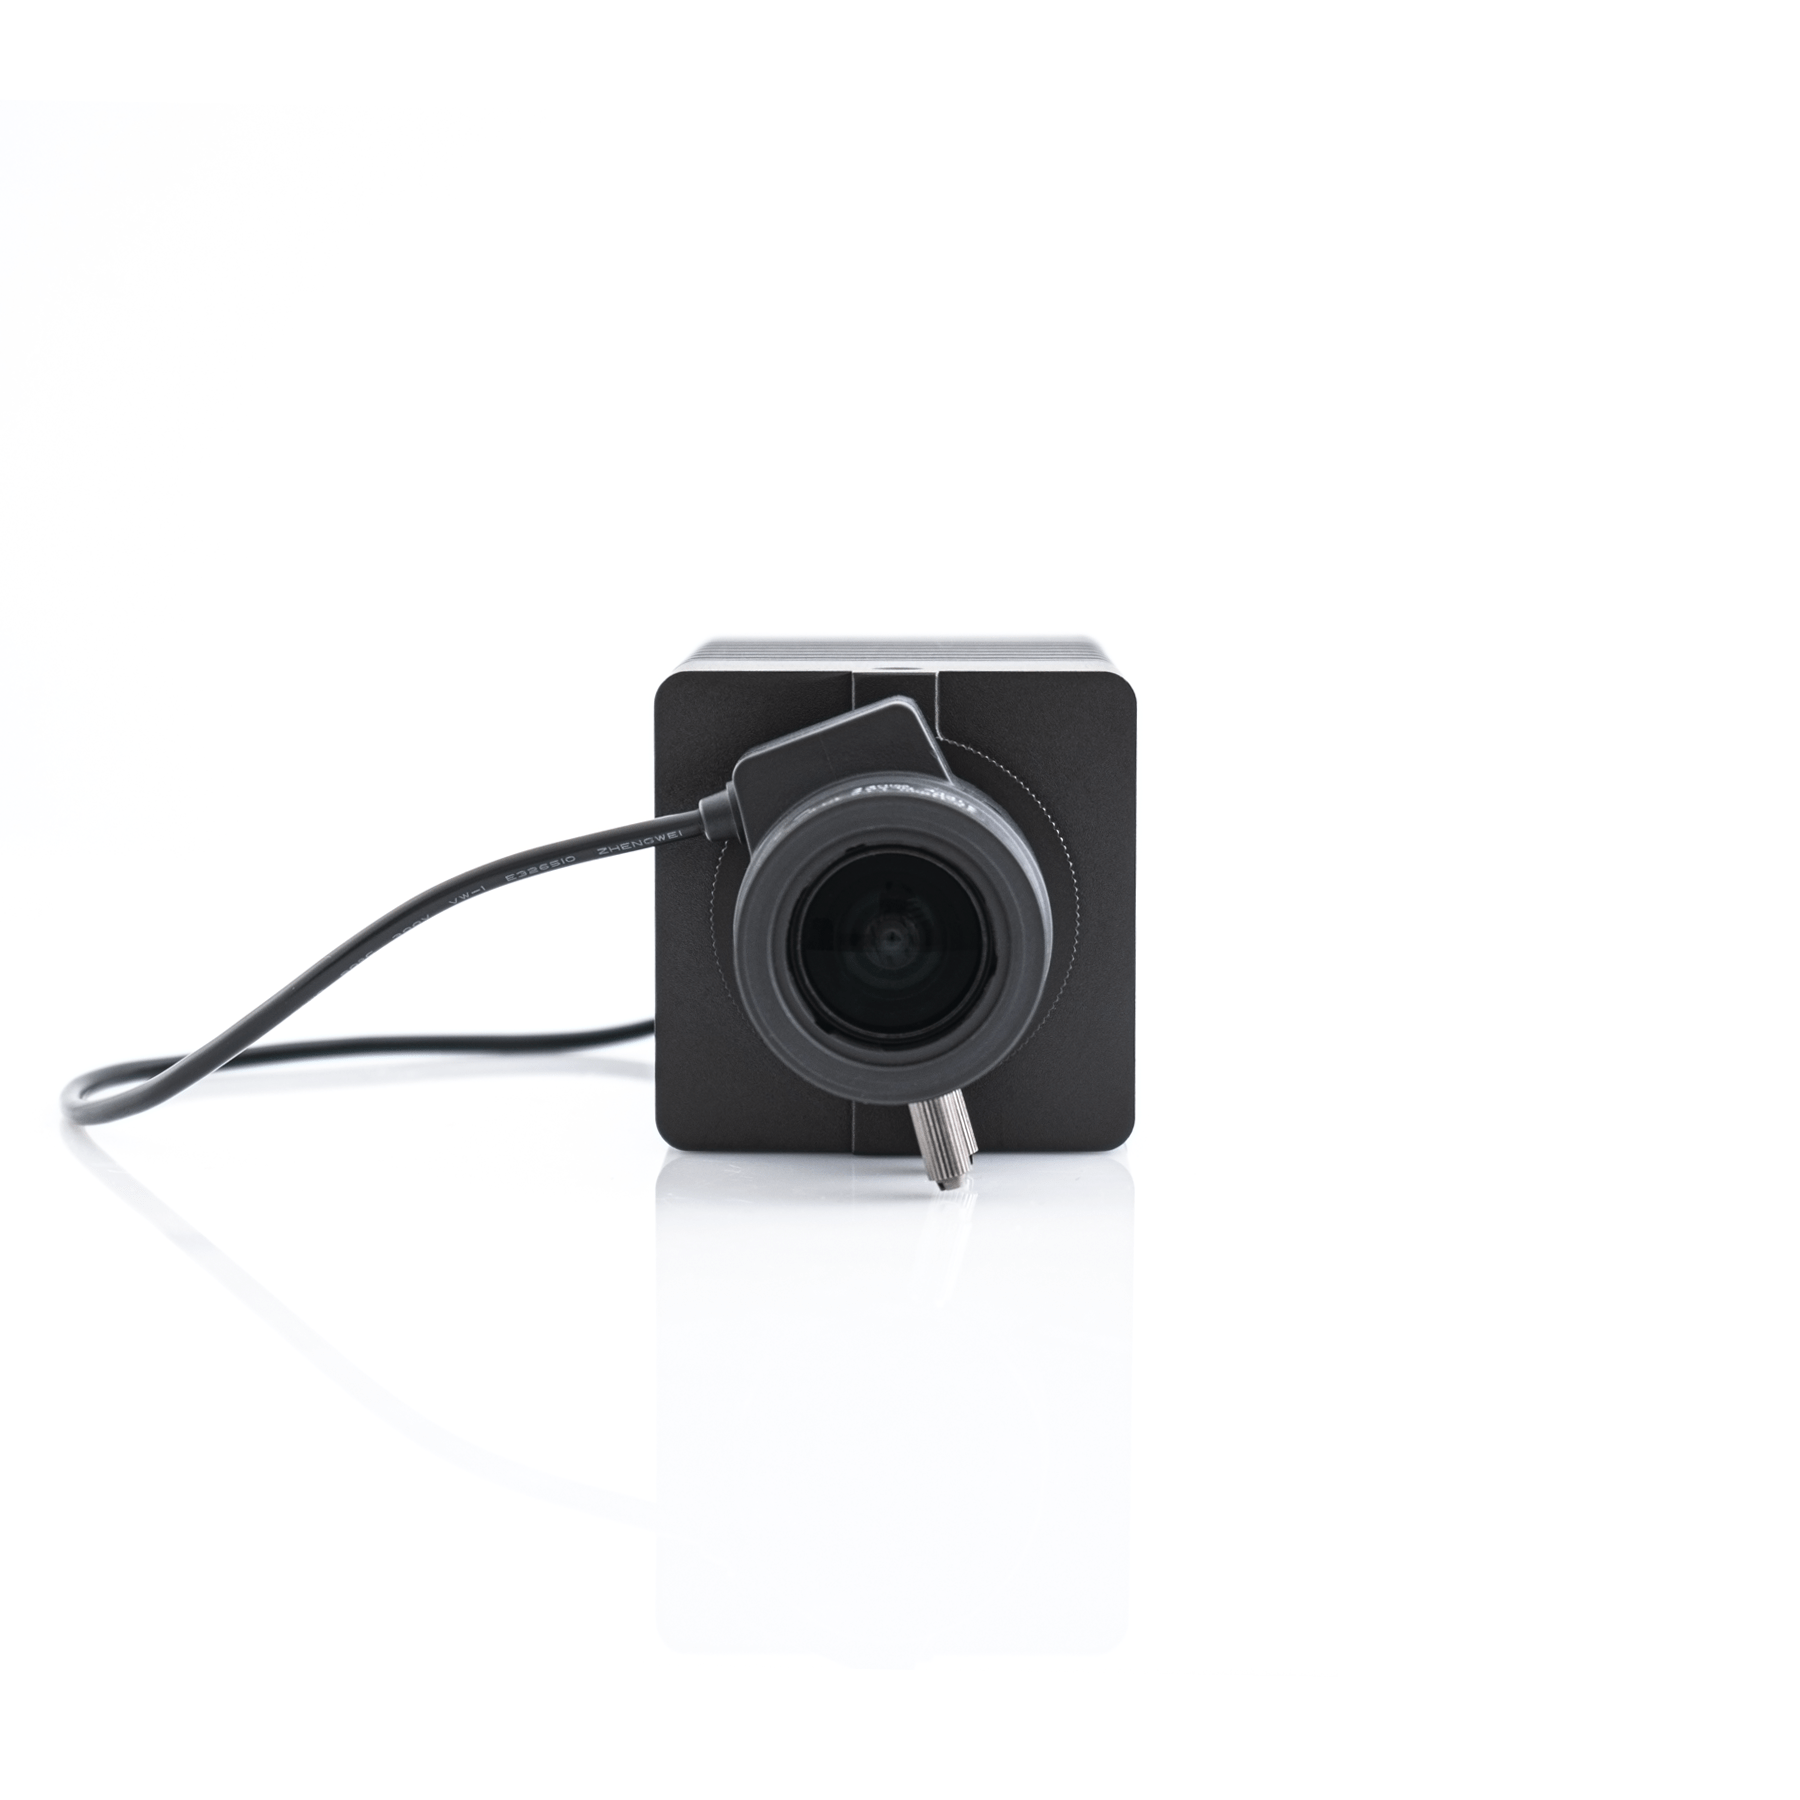 AIDA Imaging UHD-200 4K 60p POV Camera with Varifocal Lens in a Front View with Socket Adapter